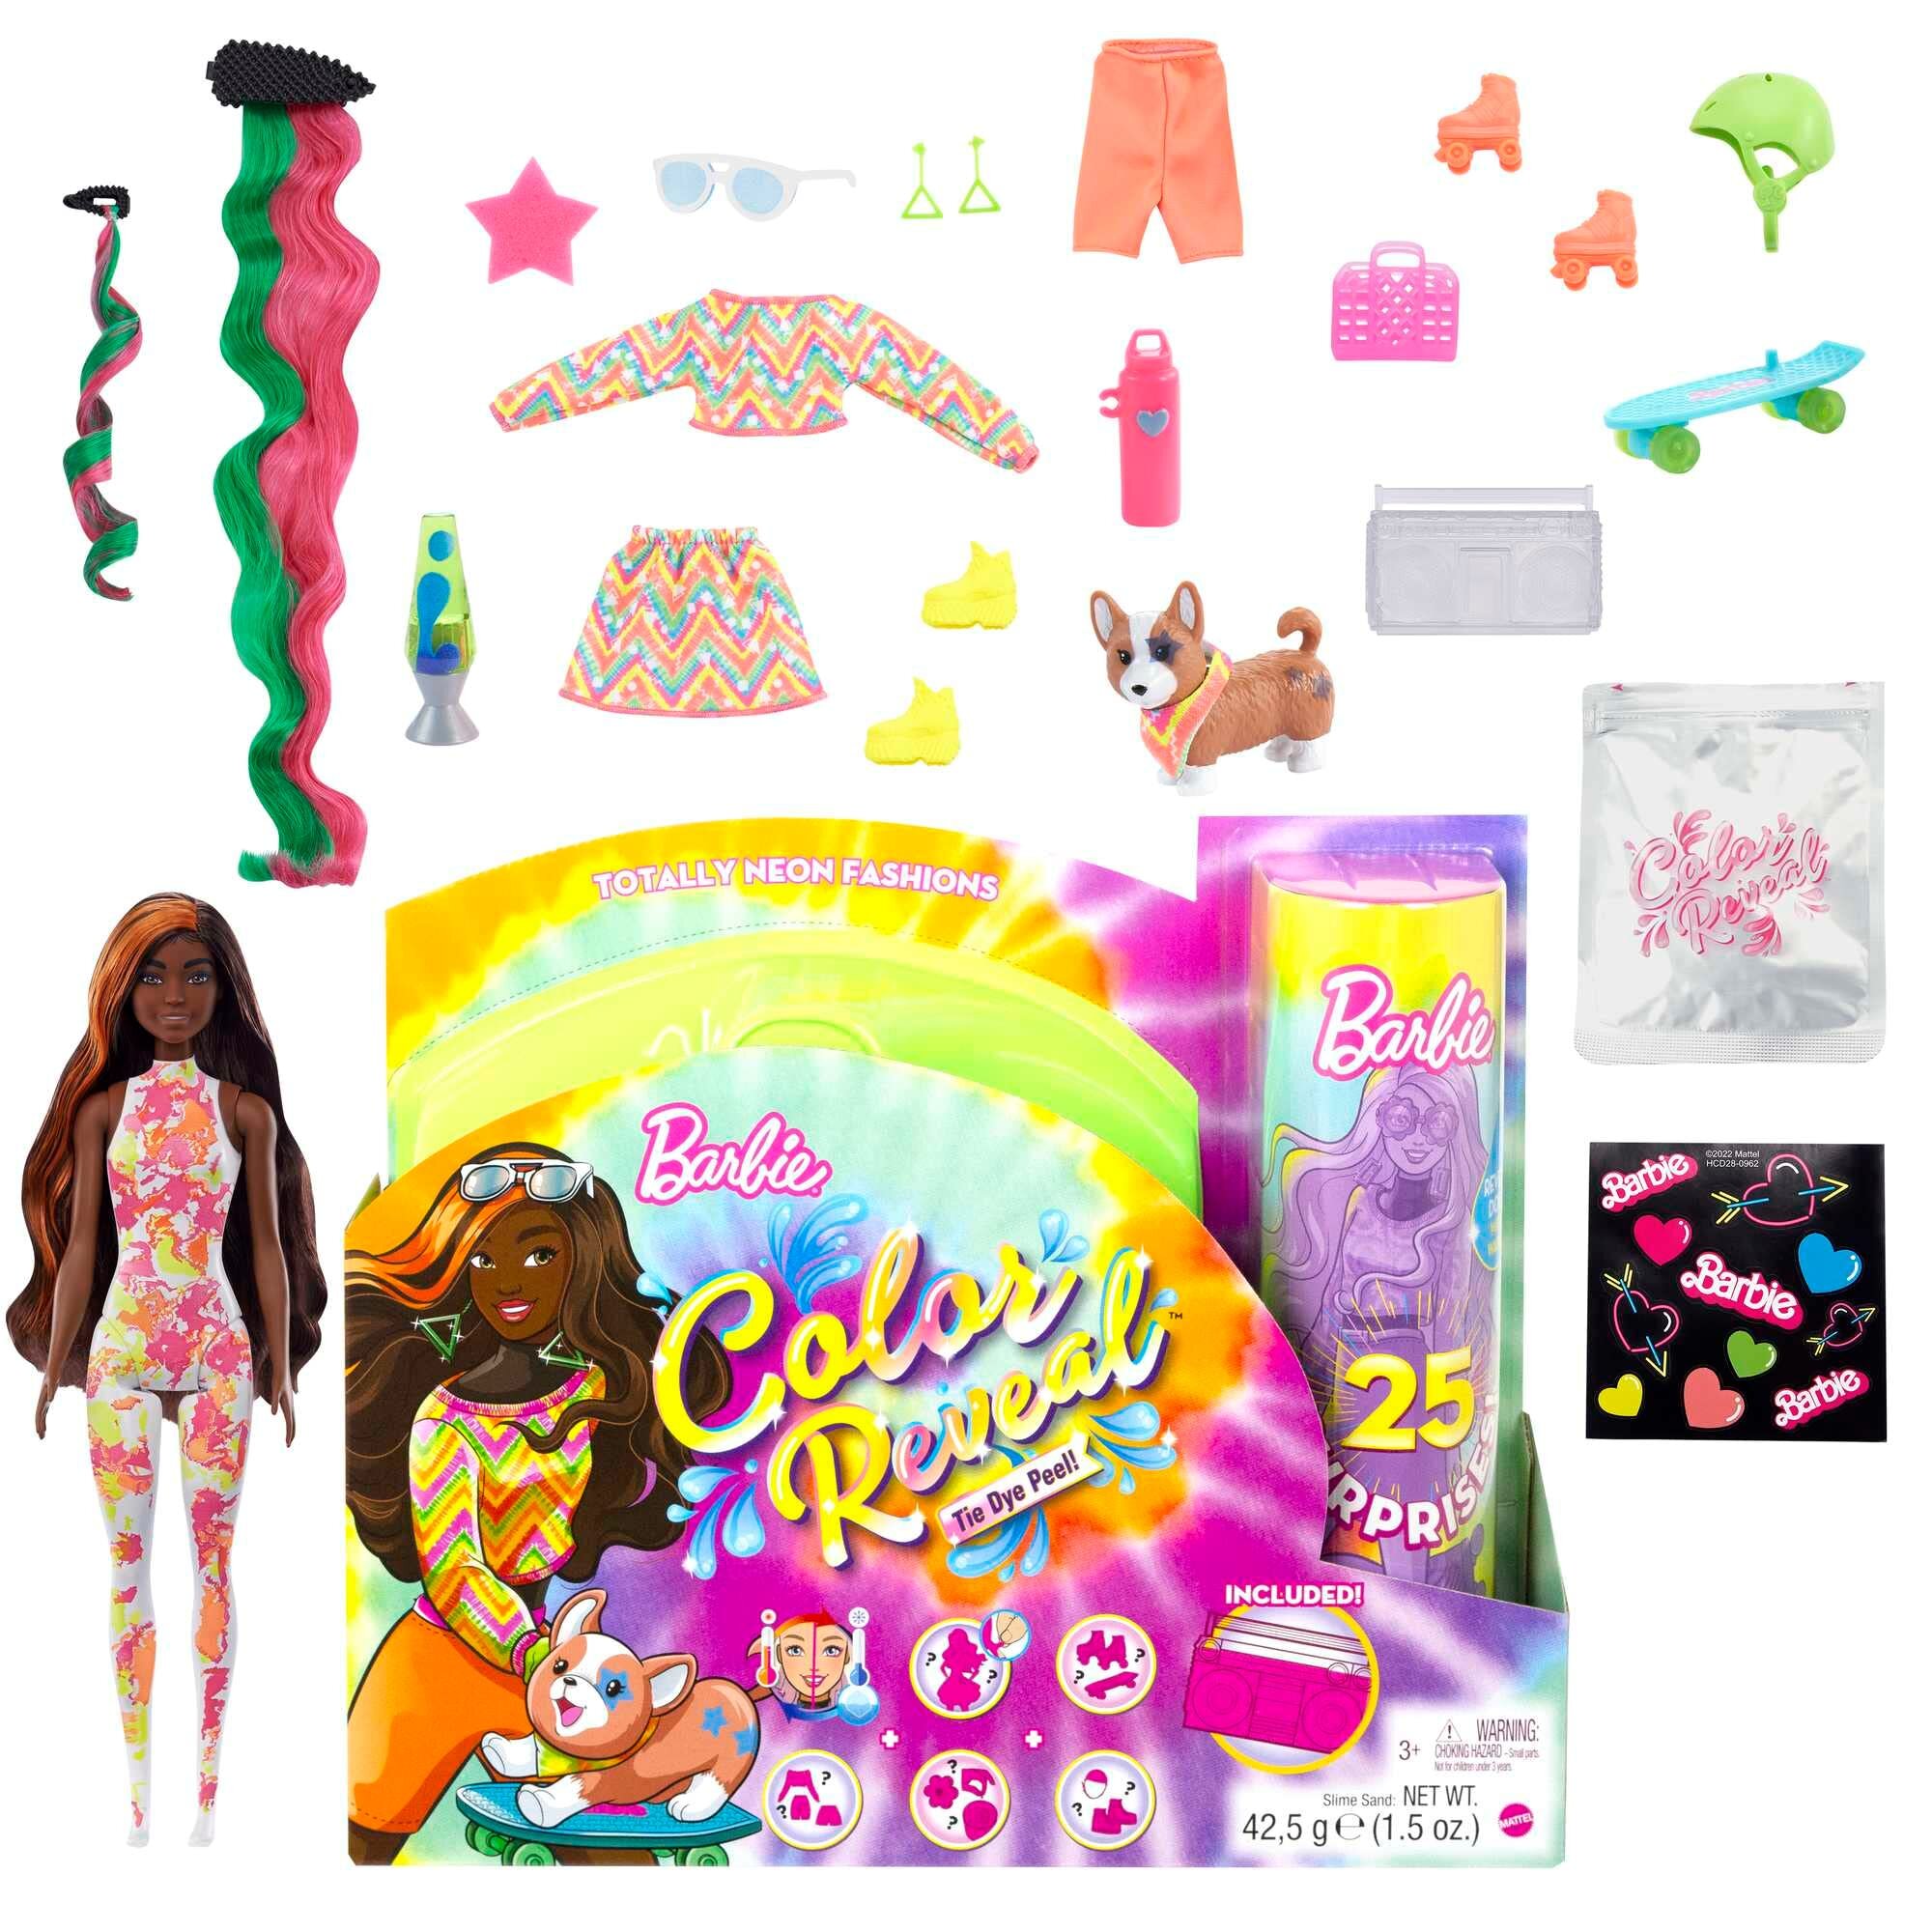 Barbie color Reveal Totally Neon Fashions Doll with Orange-Streaked Brunette Hair & 25 Surprises Including color change, gift for Kids